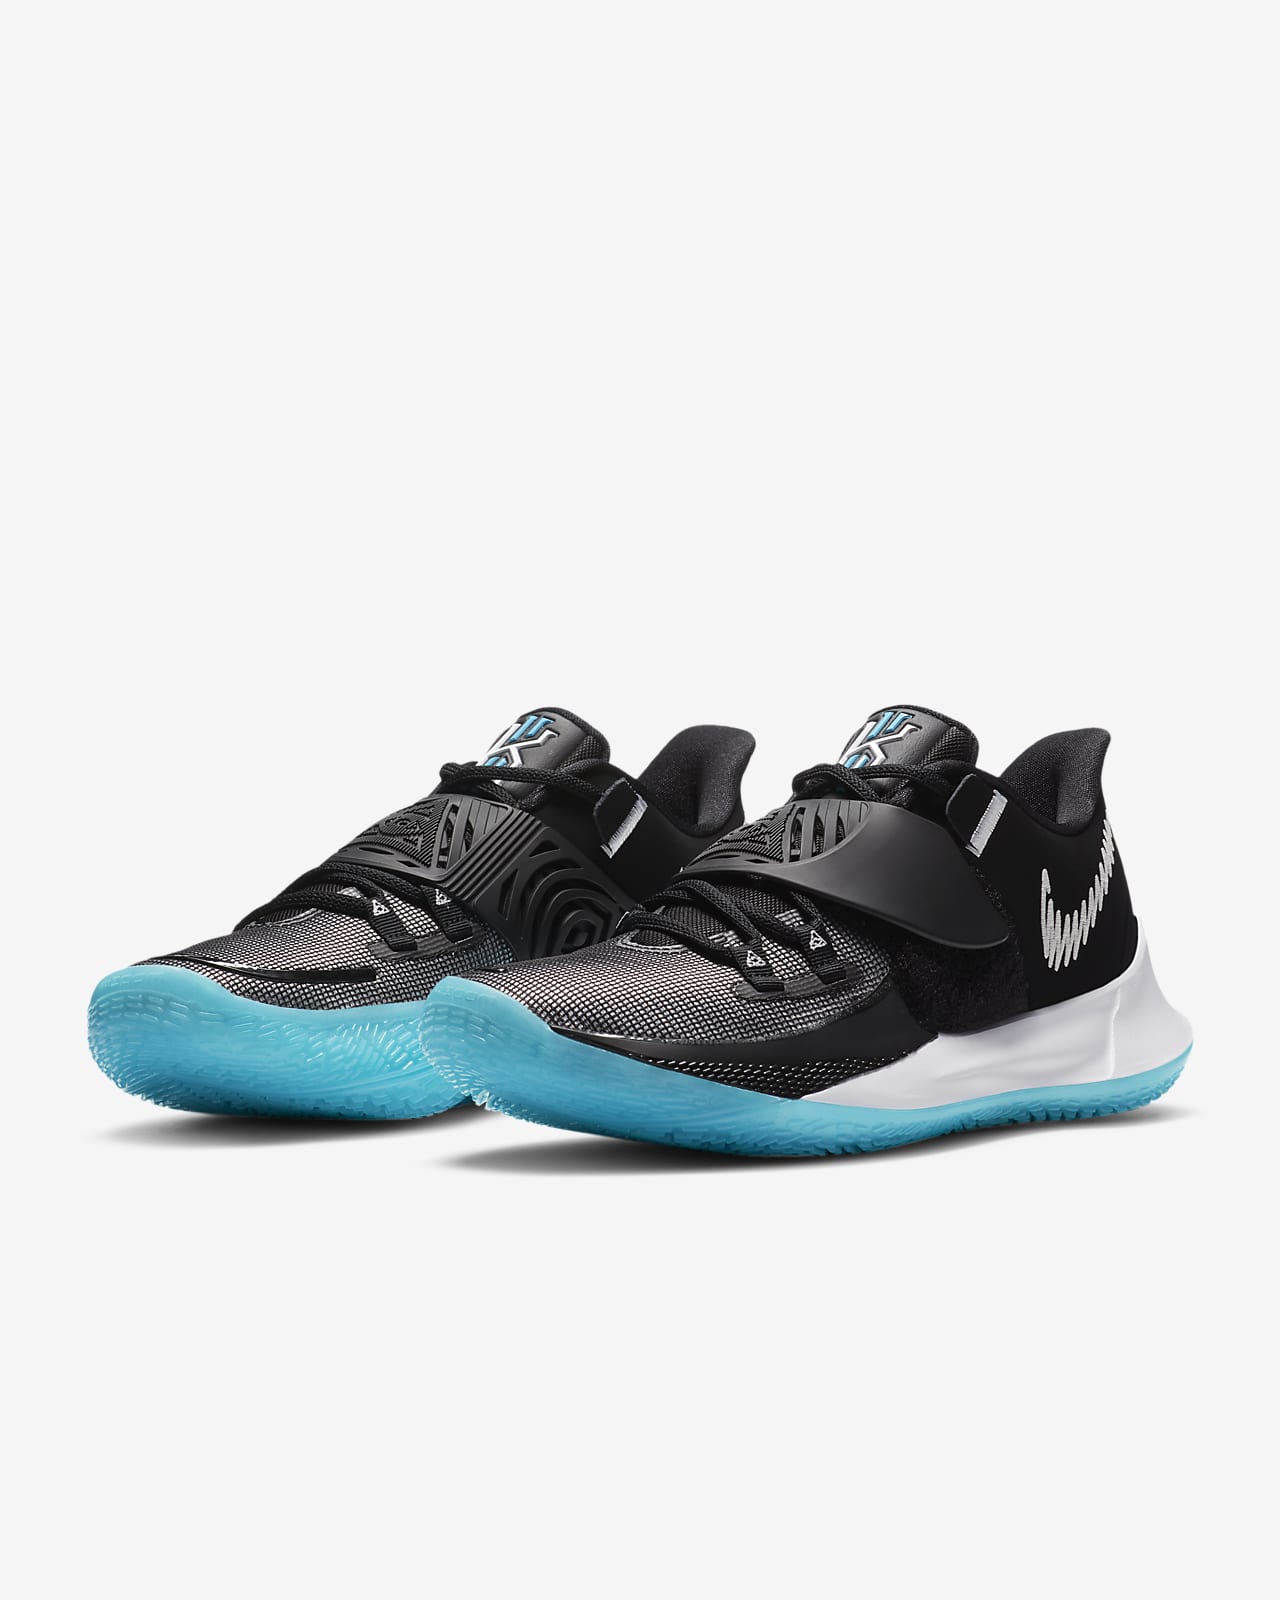 kyrie low top basketball shoes